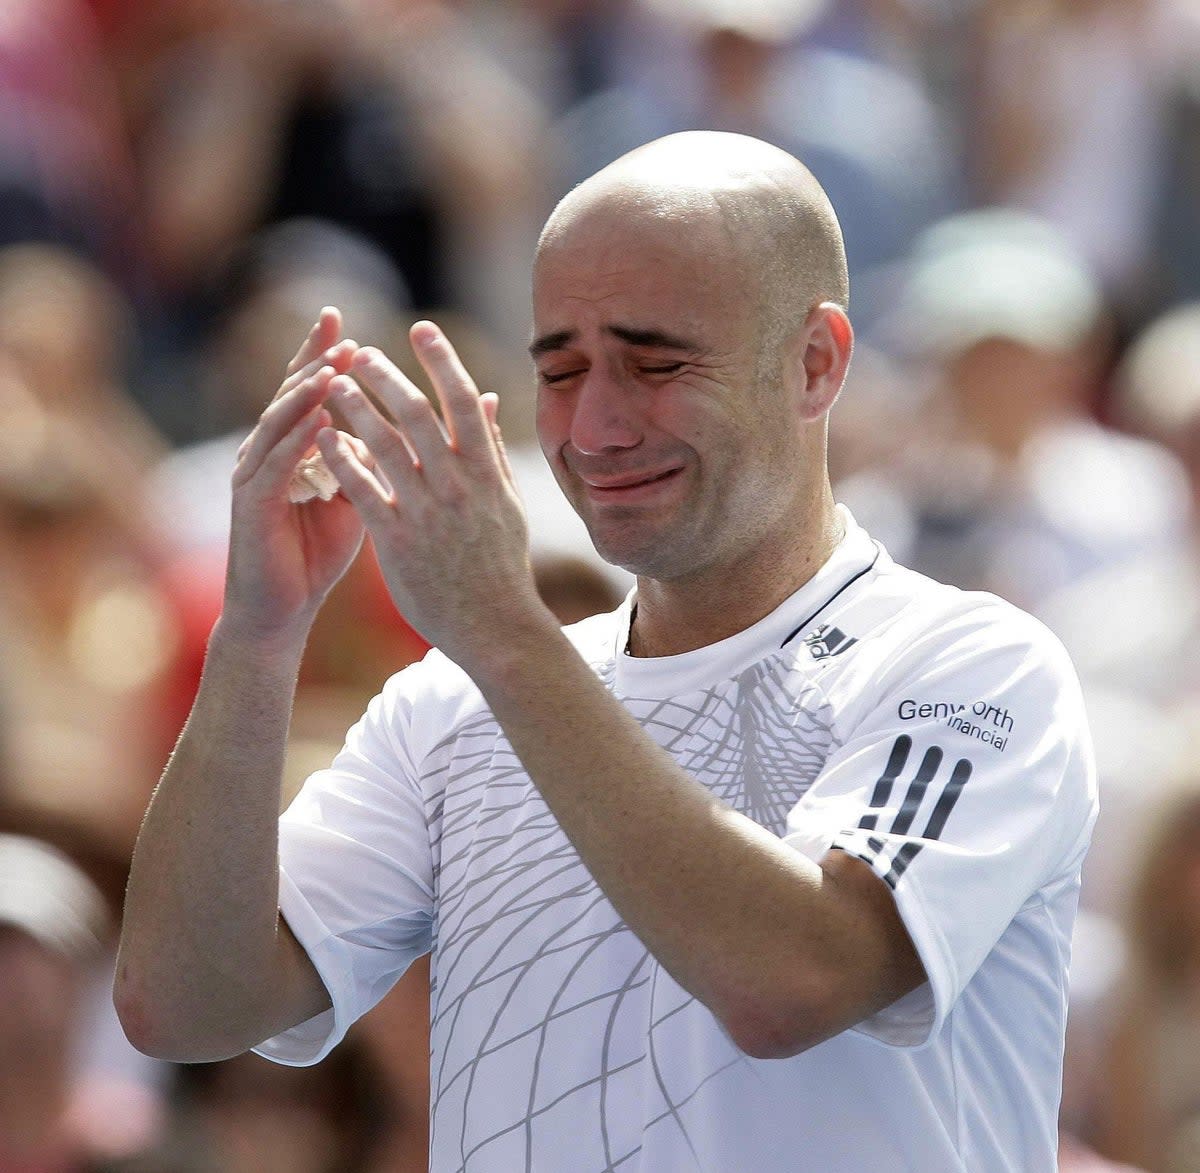 Andre Agassi was in tears following his retirement at the US Open in 2006 (PA Archive) (PA Archive)